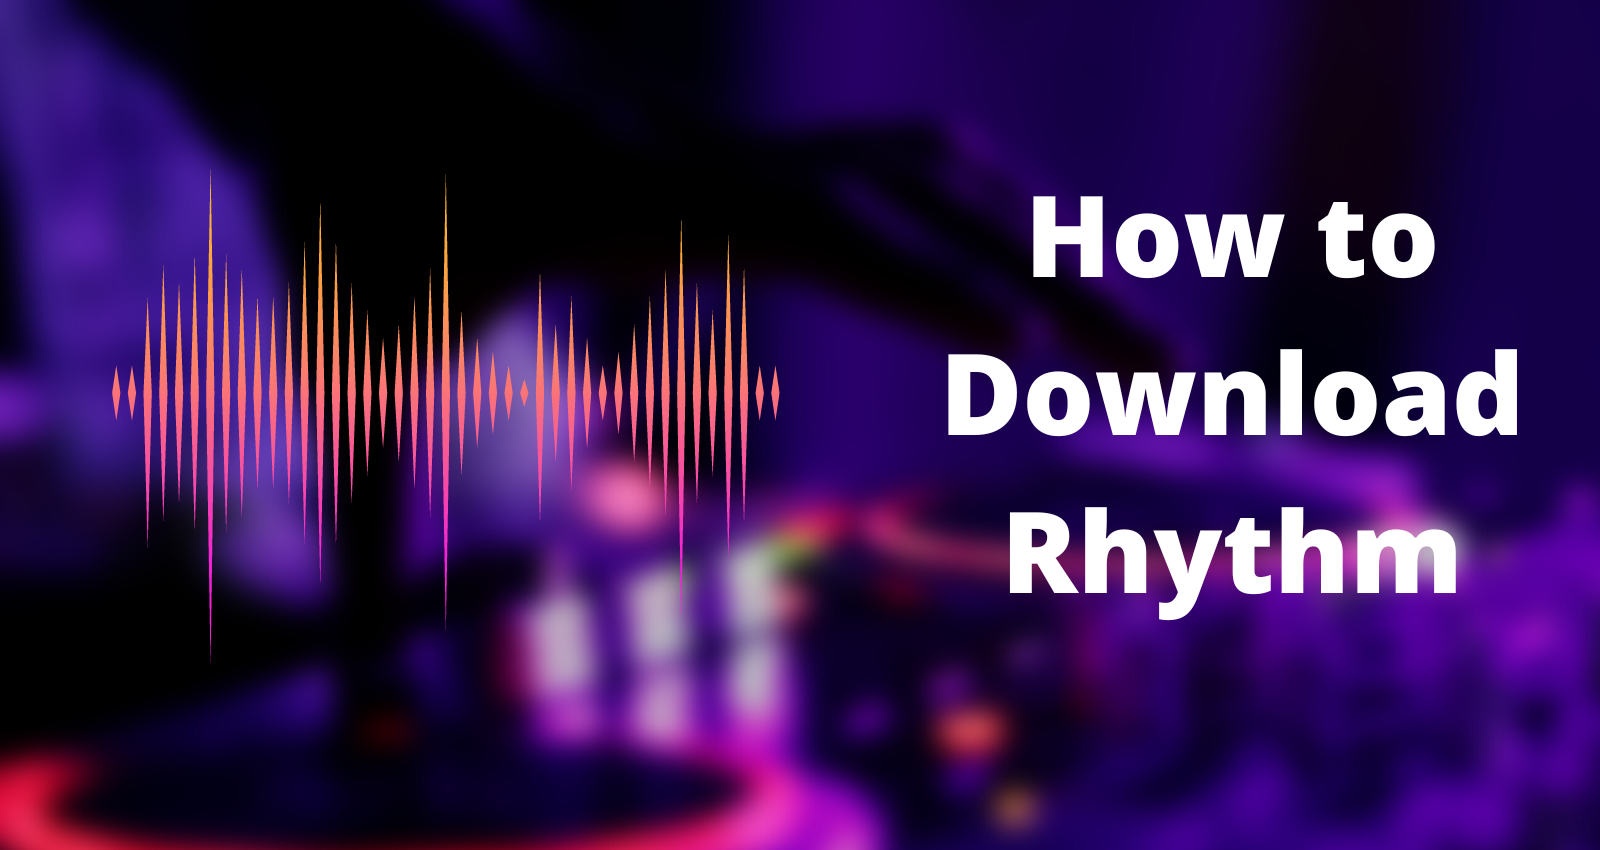 How to Download Rhythm